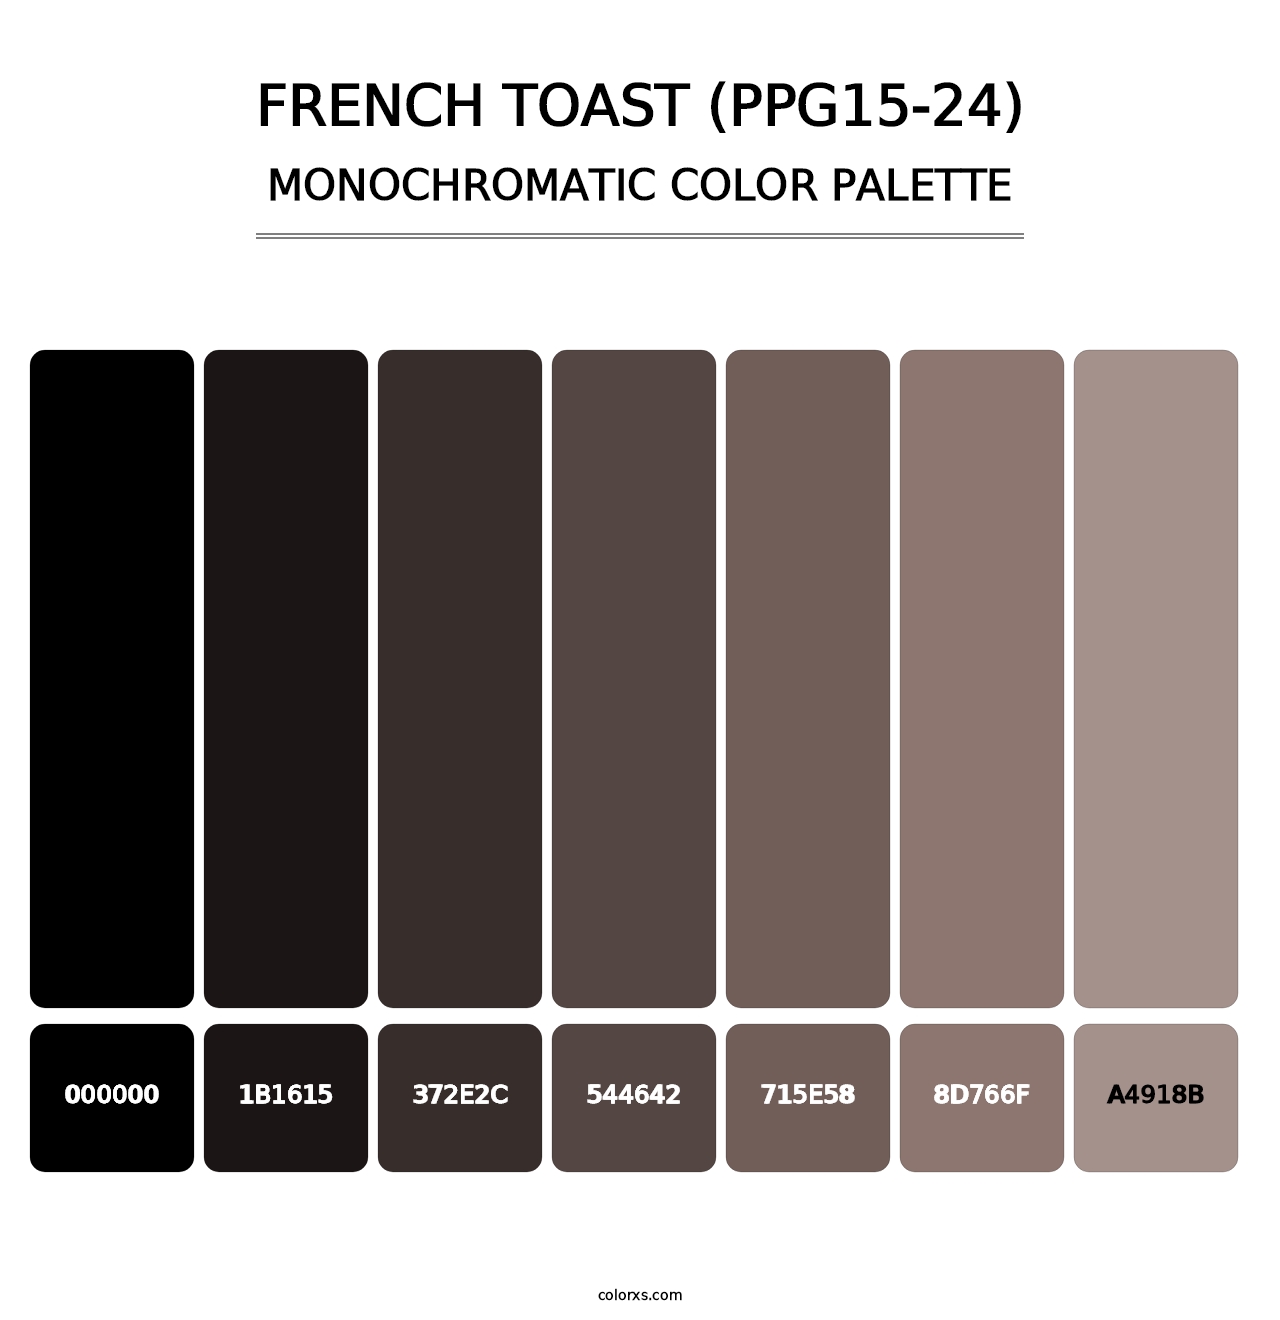 French Toast (PPG15-24) - Monochromatic Color Palette